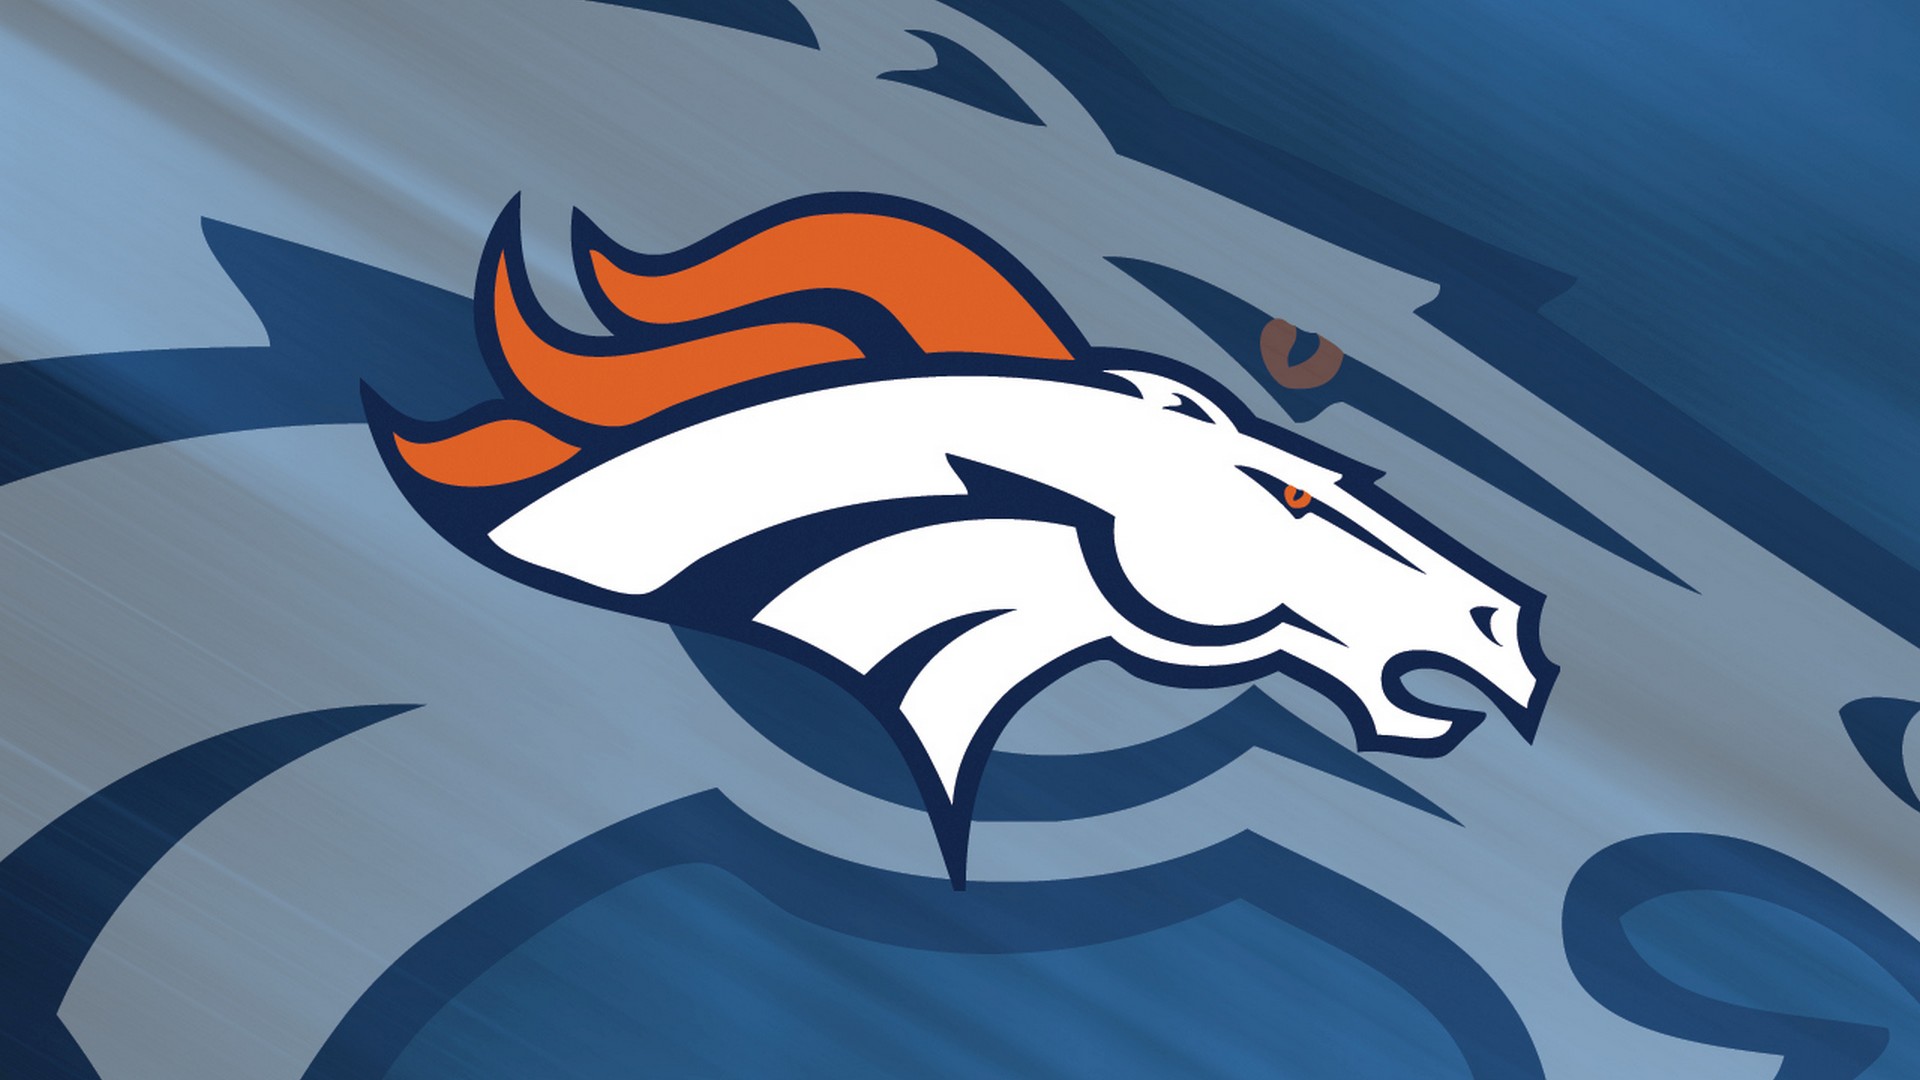 Denver Broncos Mac Wallpaper With high-resolution 1920X1080 pixel. Download and set as wallpaper for Desktop Computer, Apple iPhone X, XS Max, XR, 8, 7, 6, SE, iPad, Android